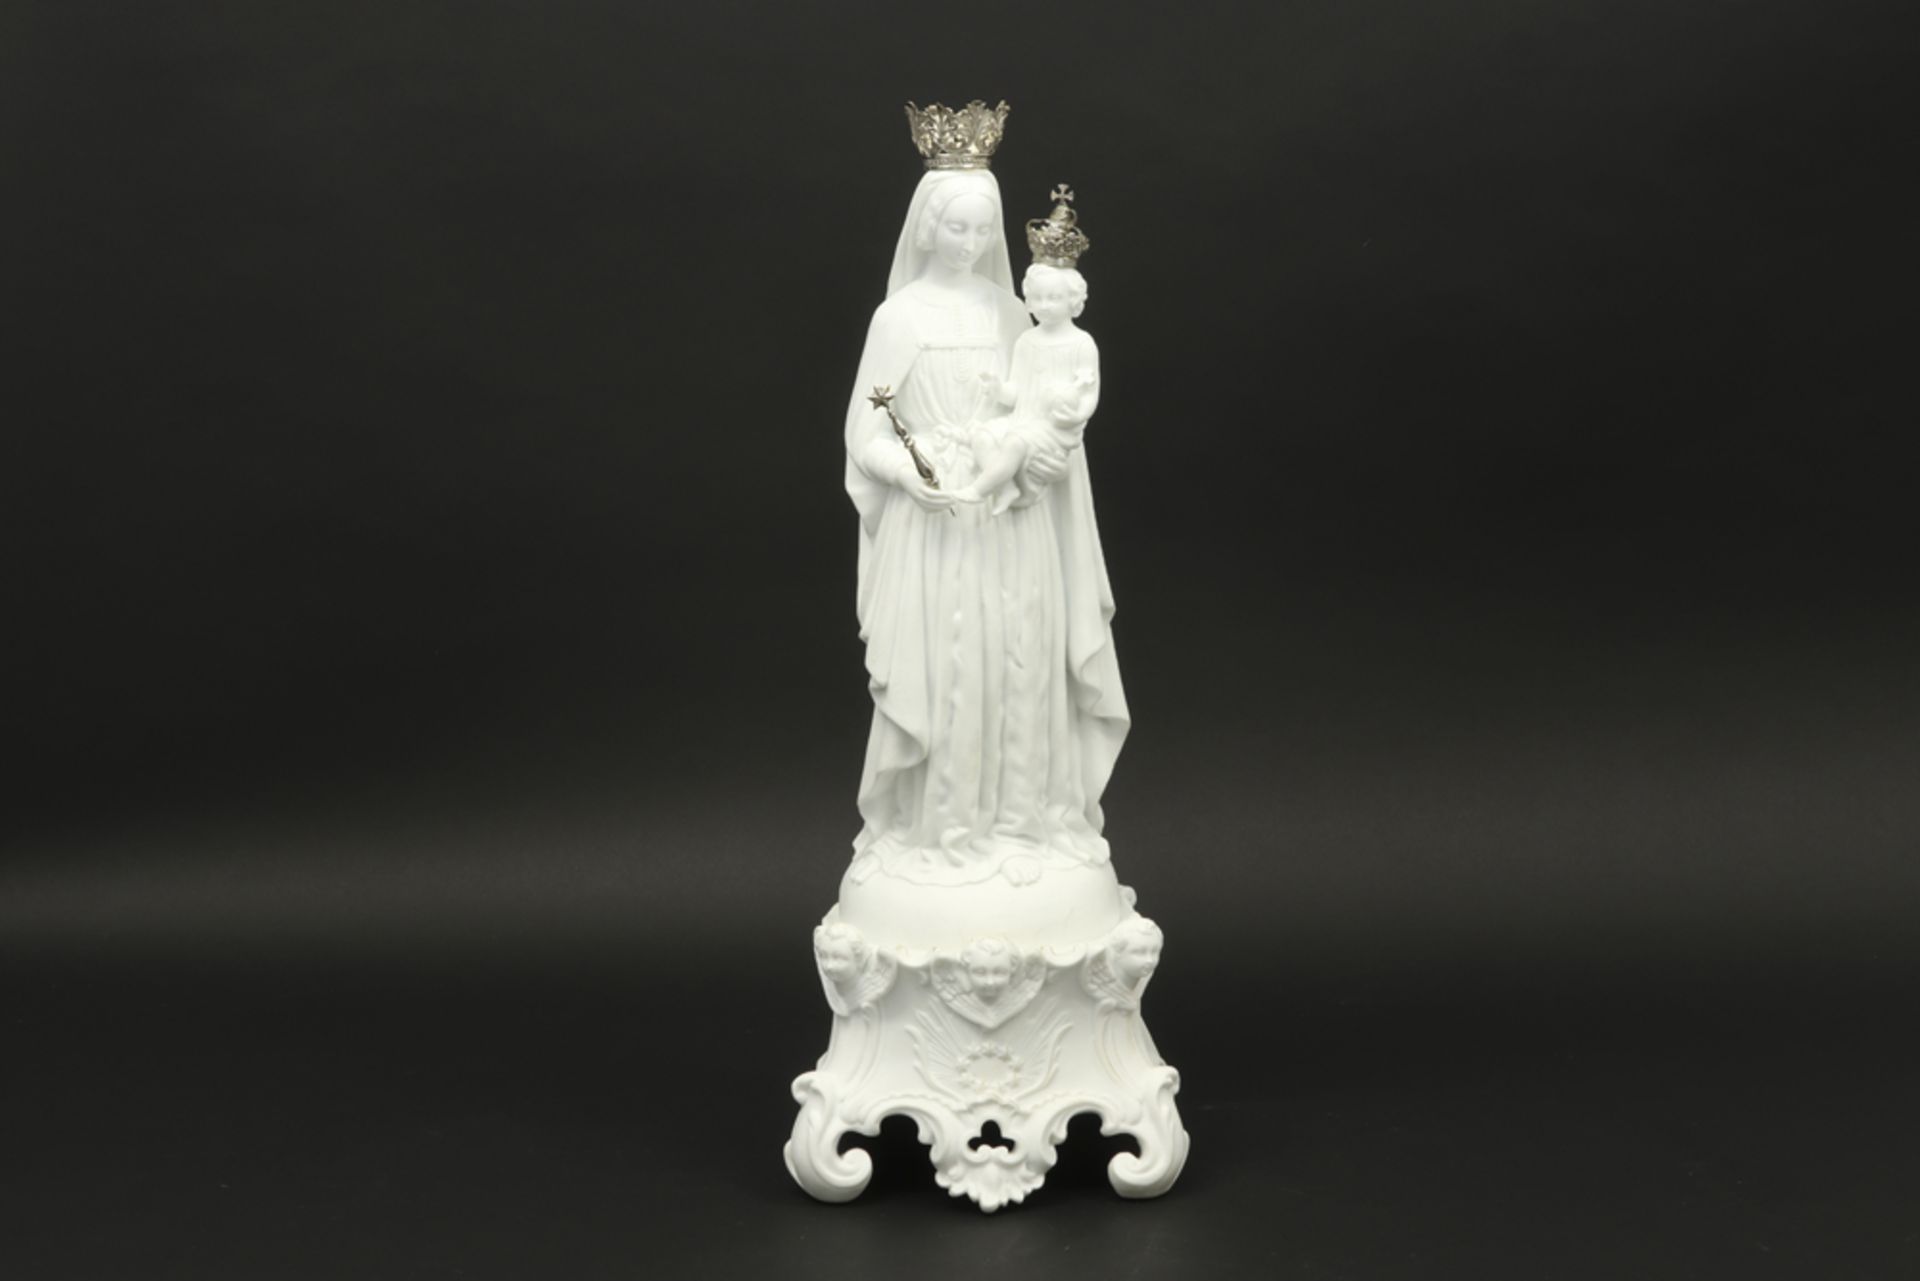 antique sculpture in biscuit-porcelain with silver crowns and staff||Antieke sculptuur in